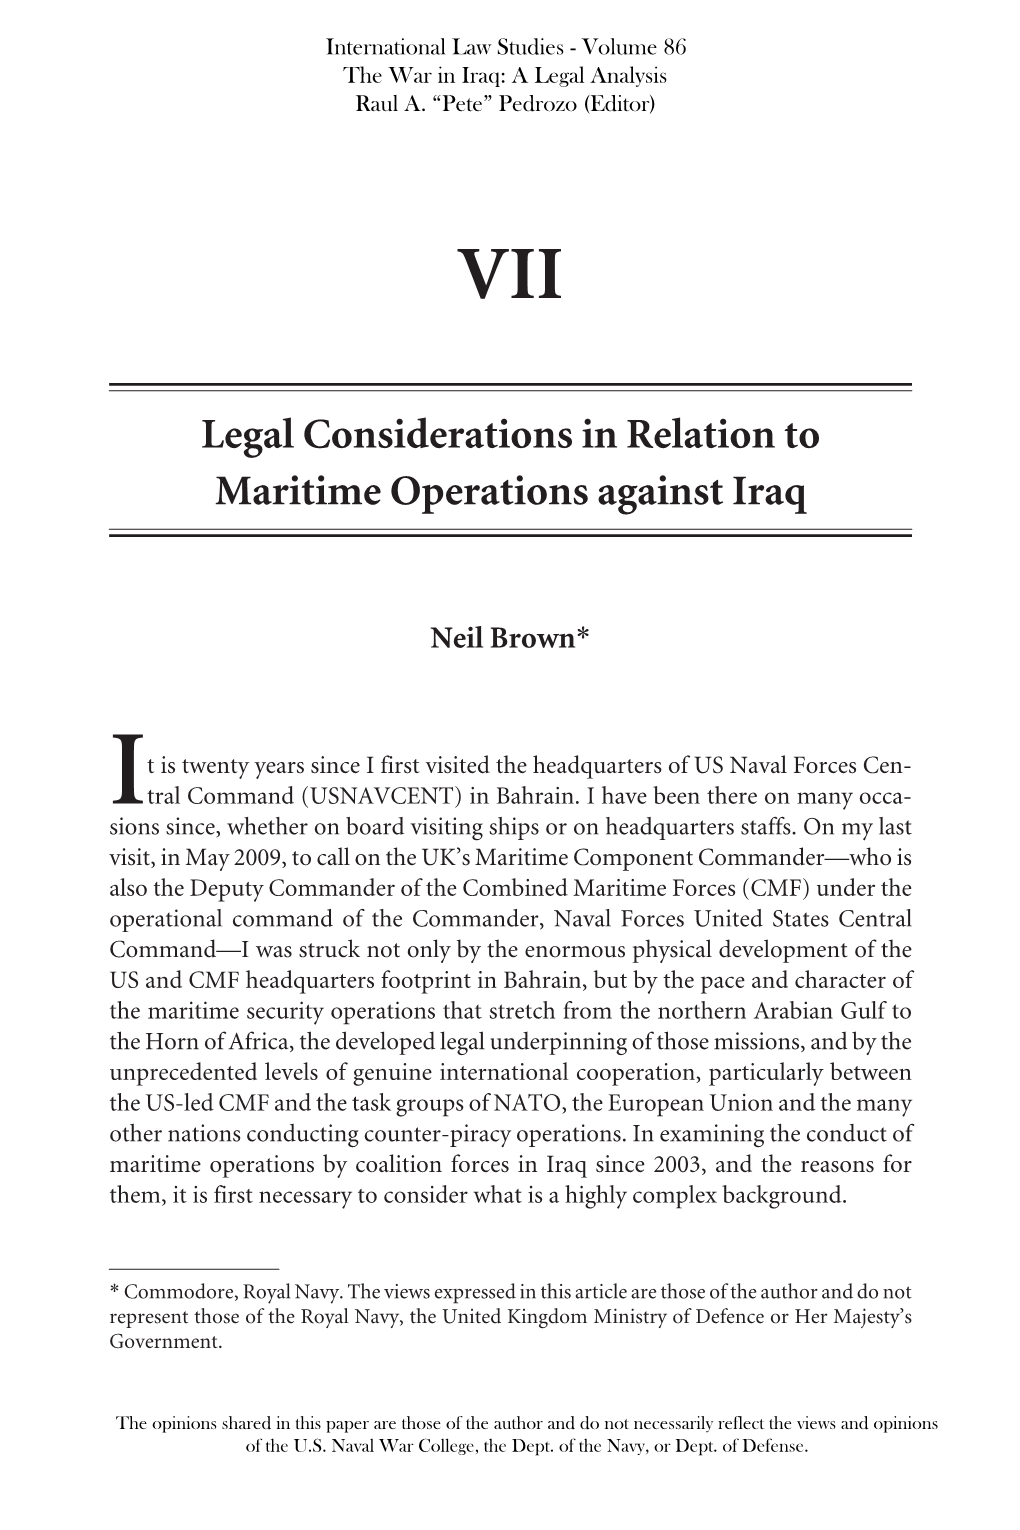 Legal Considerations in Relation to Maritime Operations Against Iraq